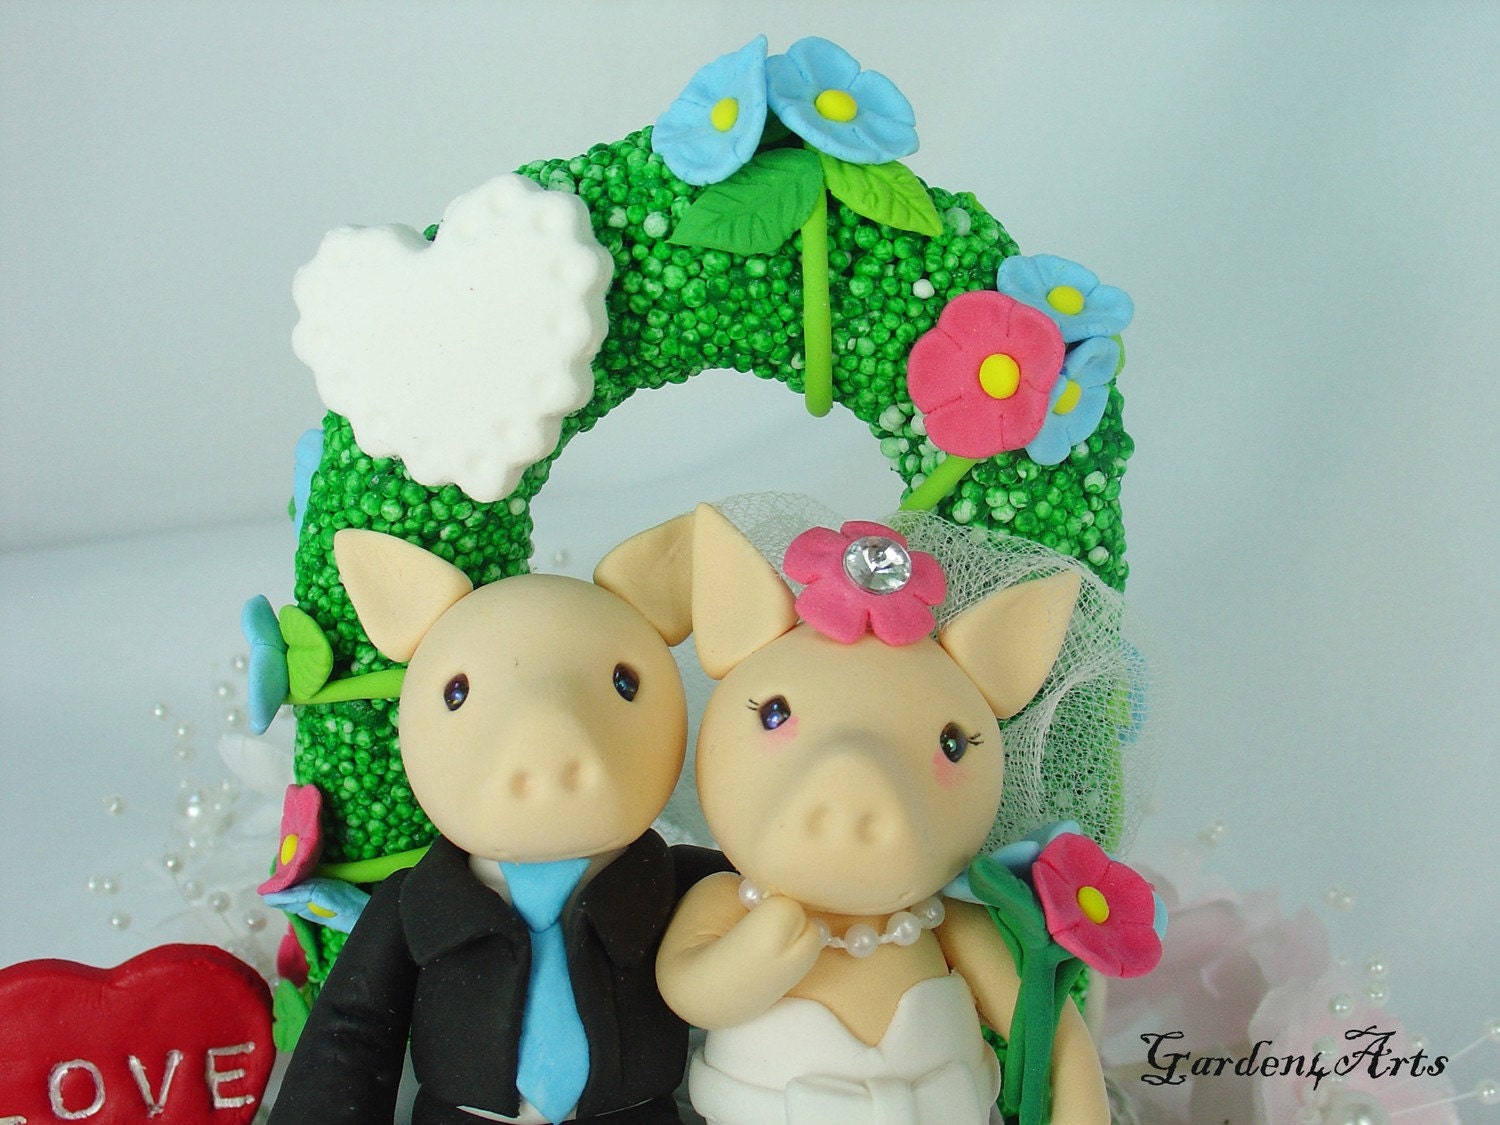 Love piggy couple with sweet bench/flower arch and grass base -custom order for southern wedding